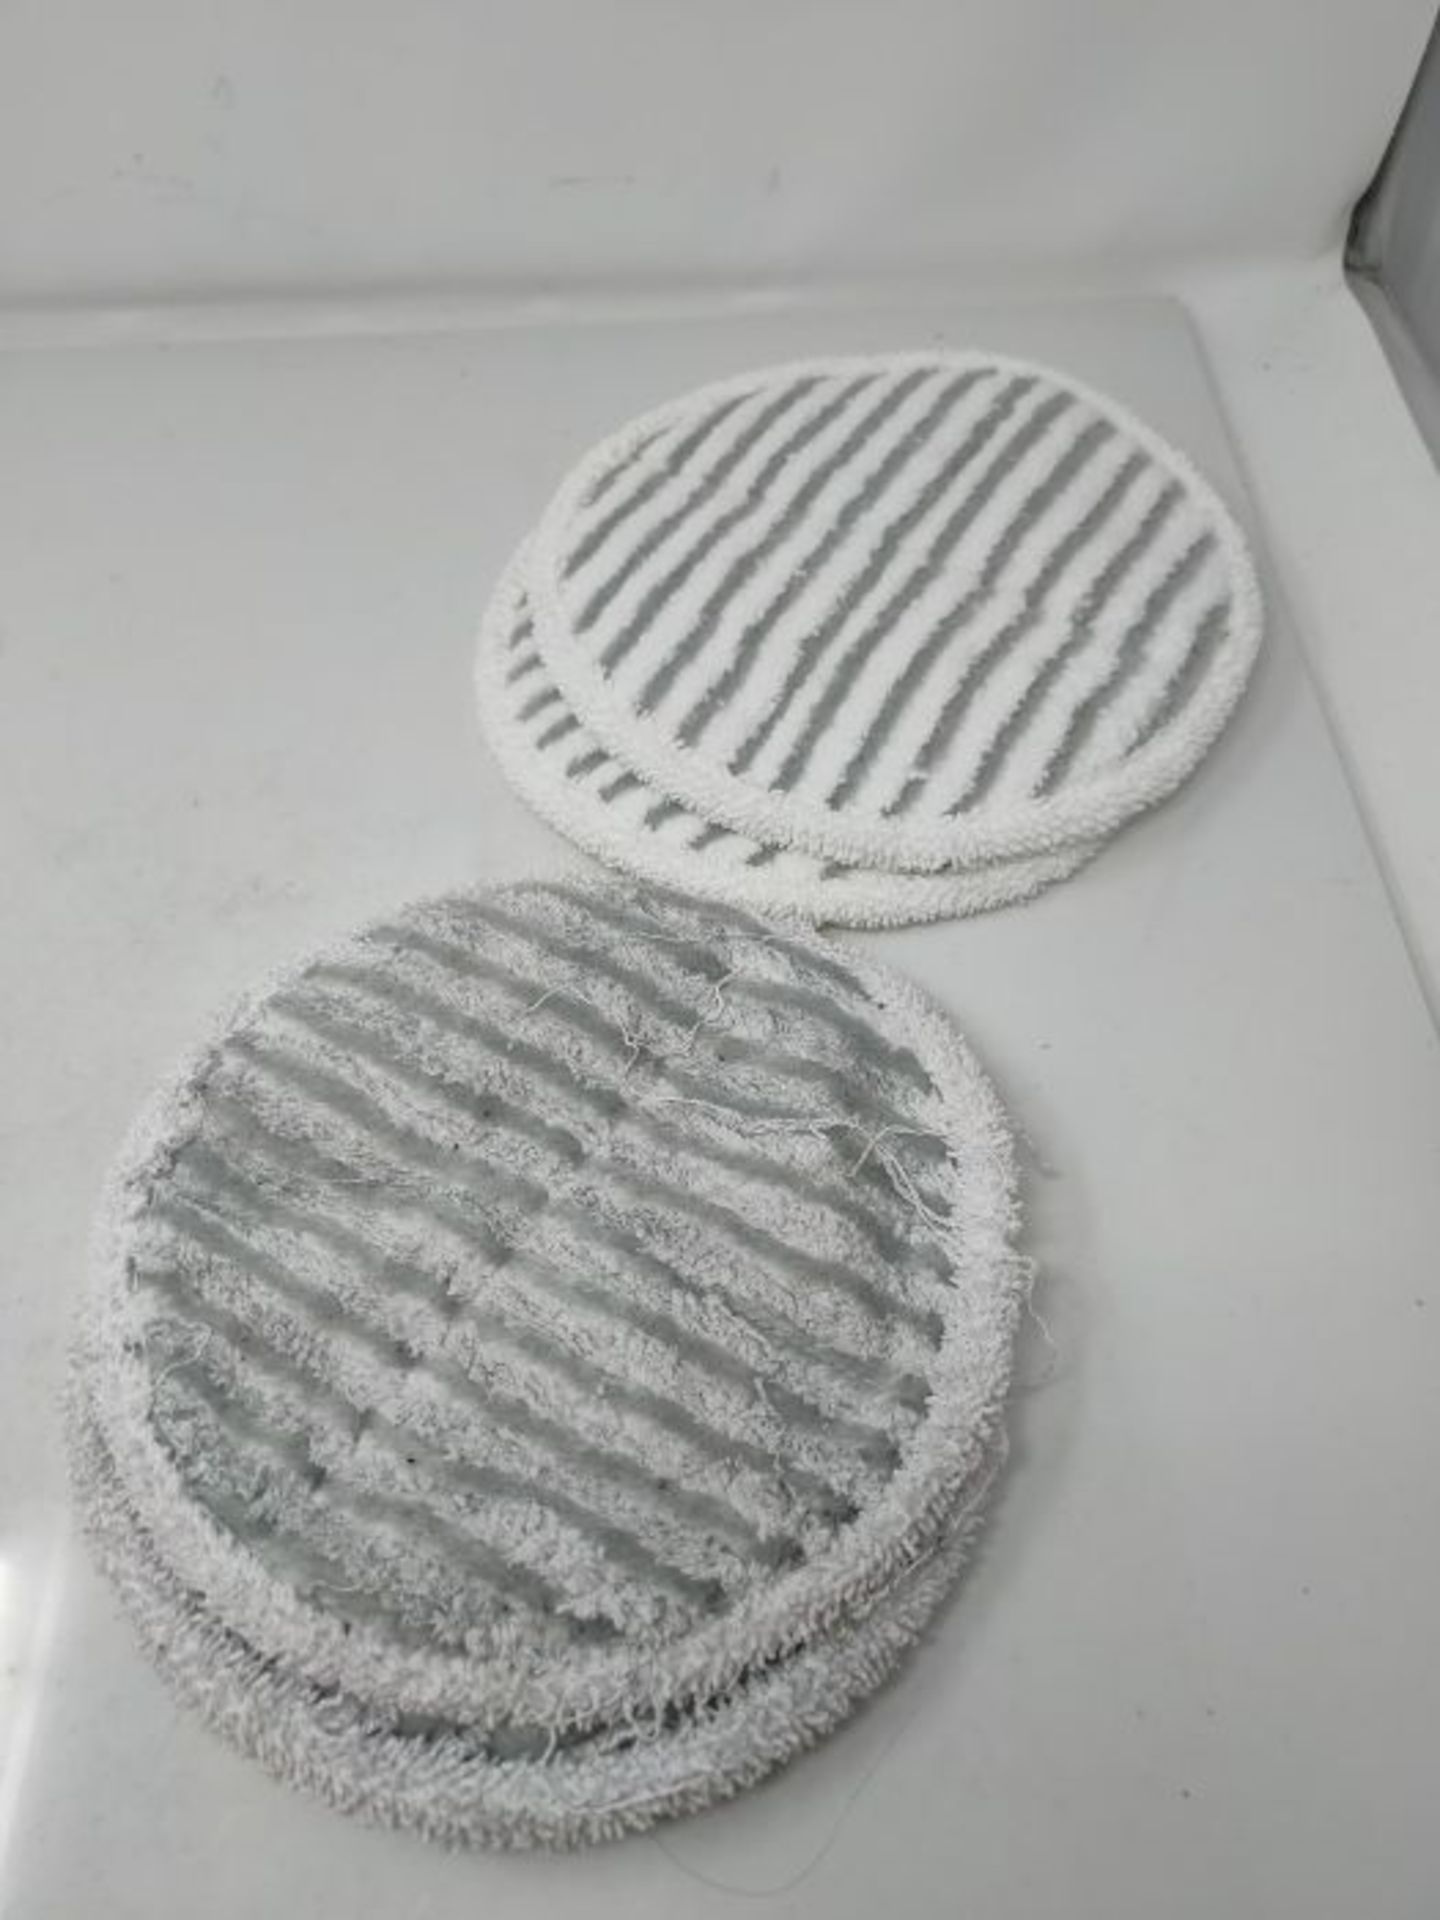 BISSELL SpinWave Scrubby Pads | 4 Tough Cleaning Pads For BISSELL SpinWave Floor Clean - Image 2 of 2